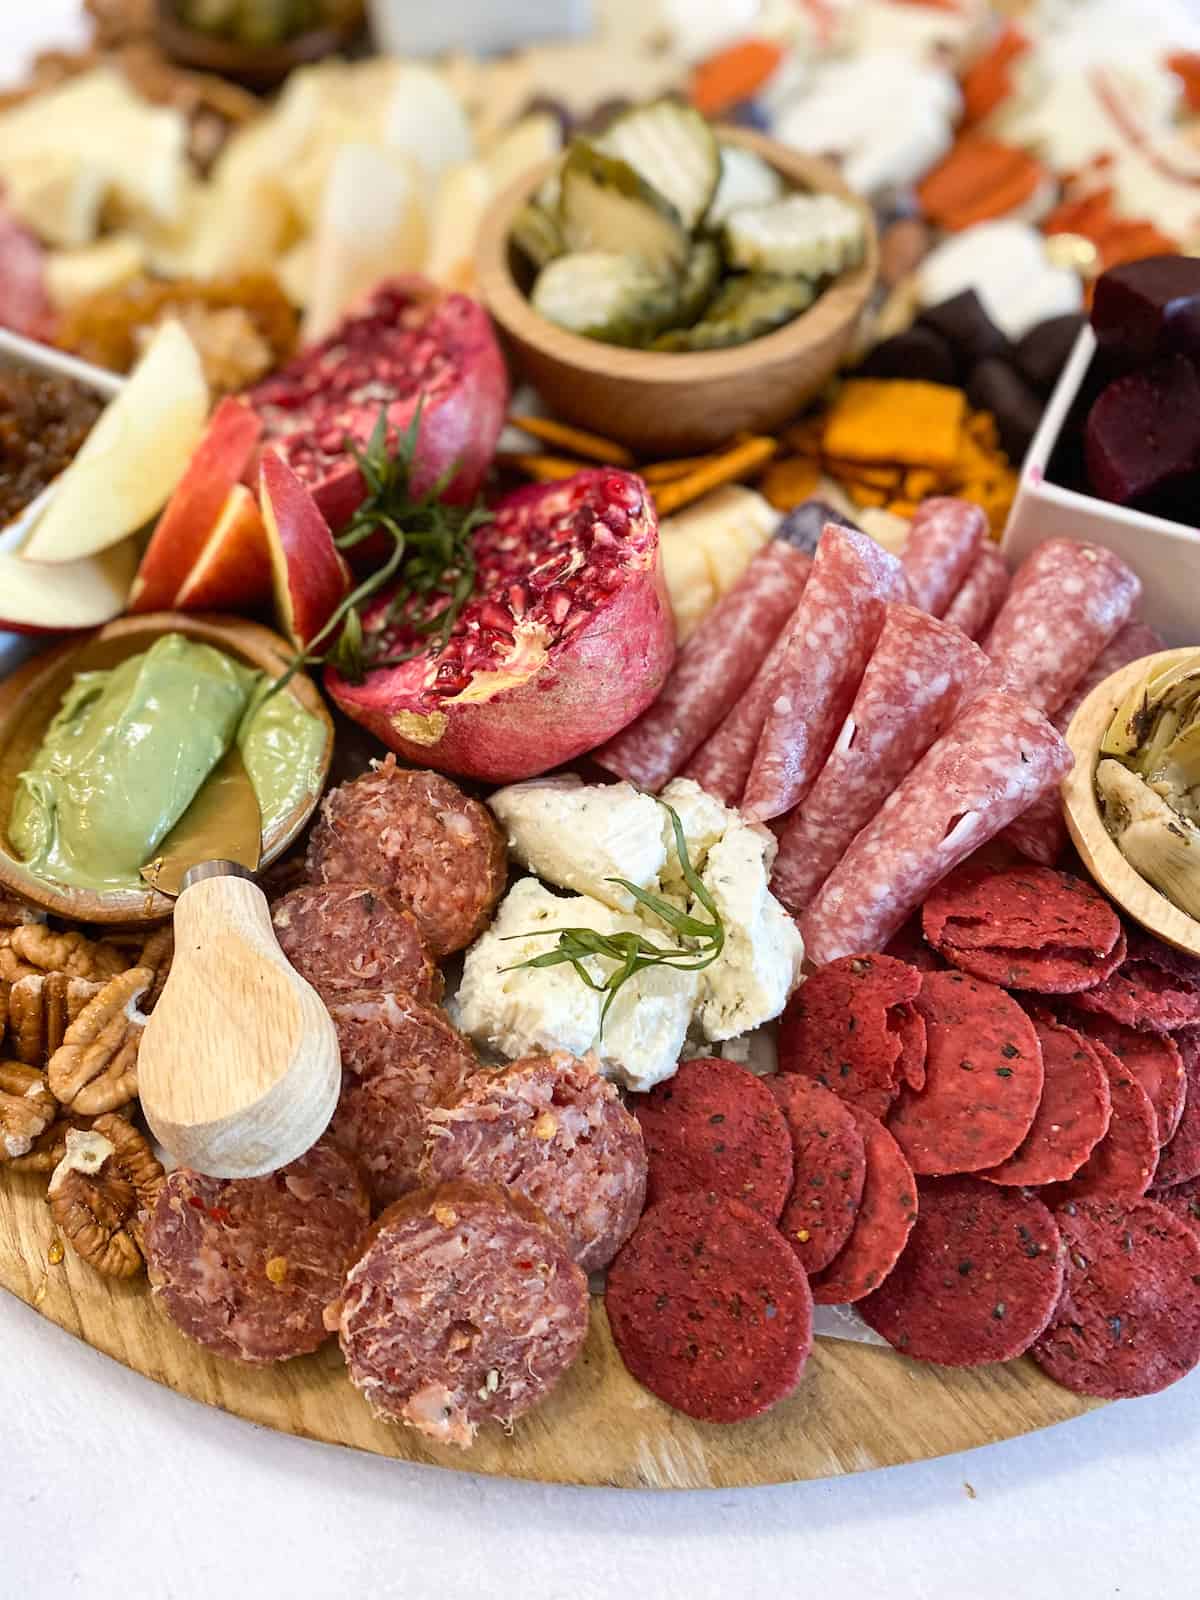 Thanksgiving charcuterie board items like meat, crackers and cheese